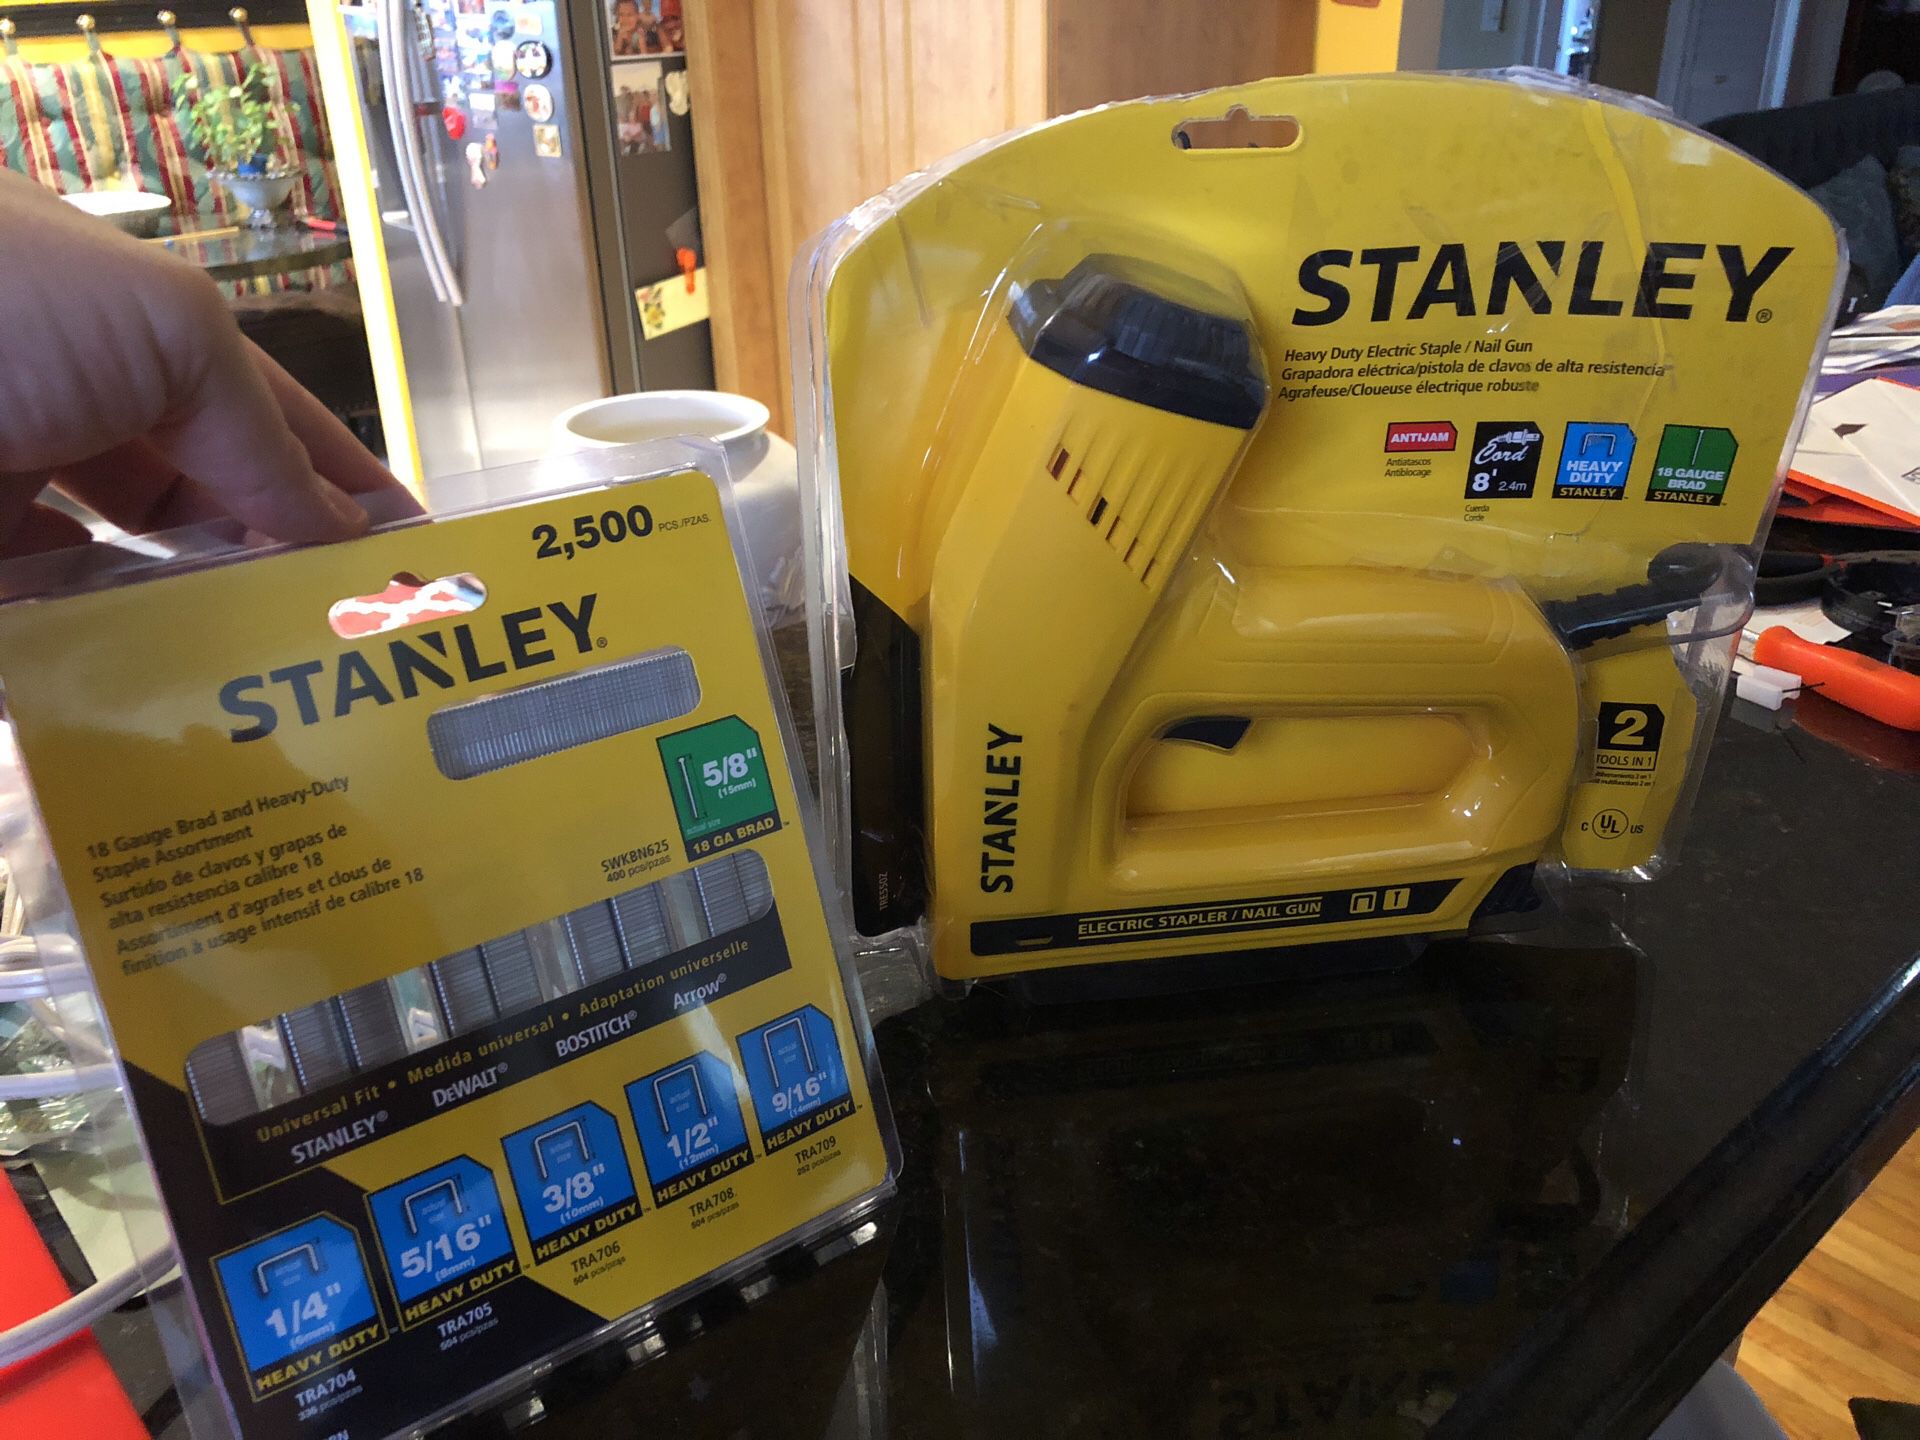 Stanley Heavy Duty staple and nail gun, with staples and nails